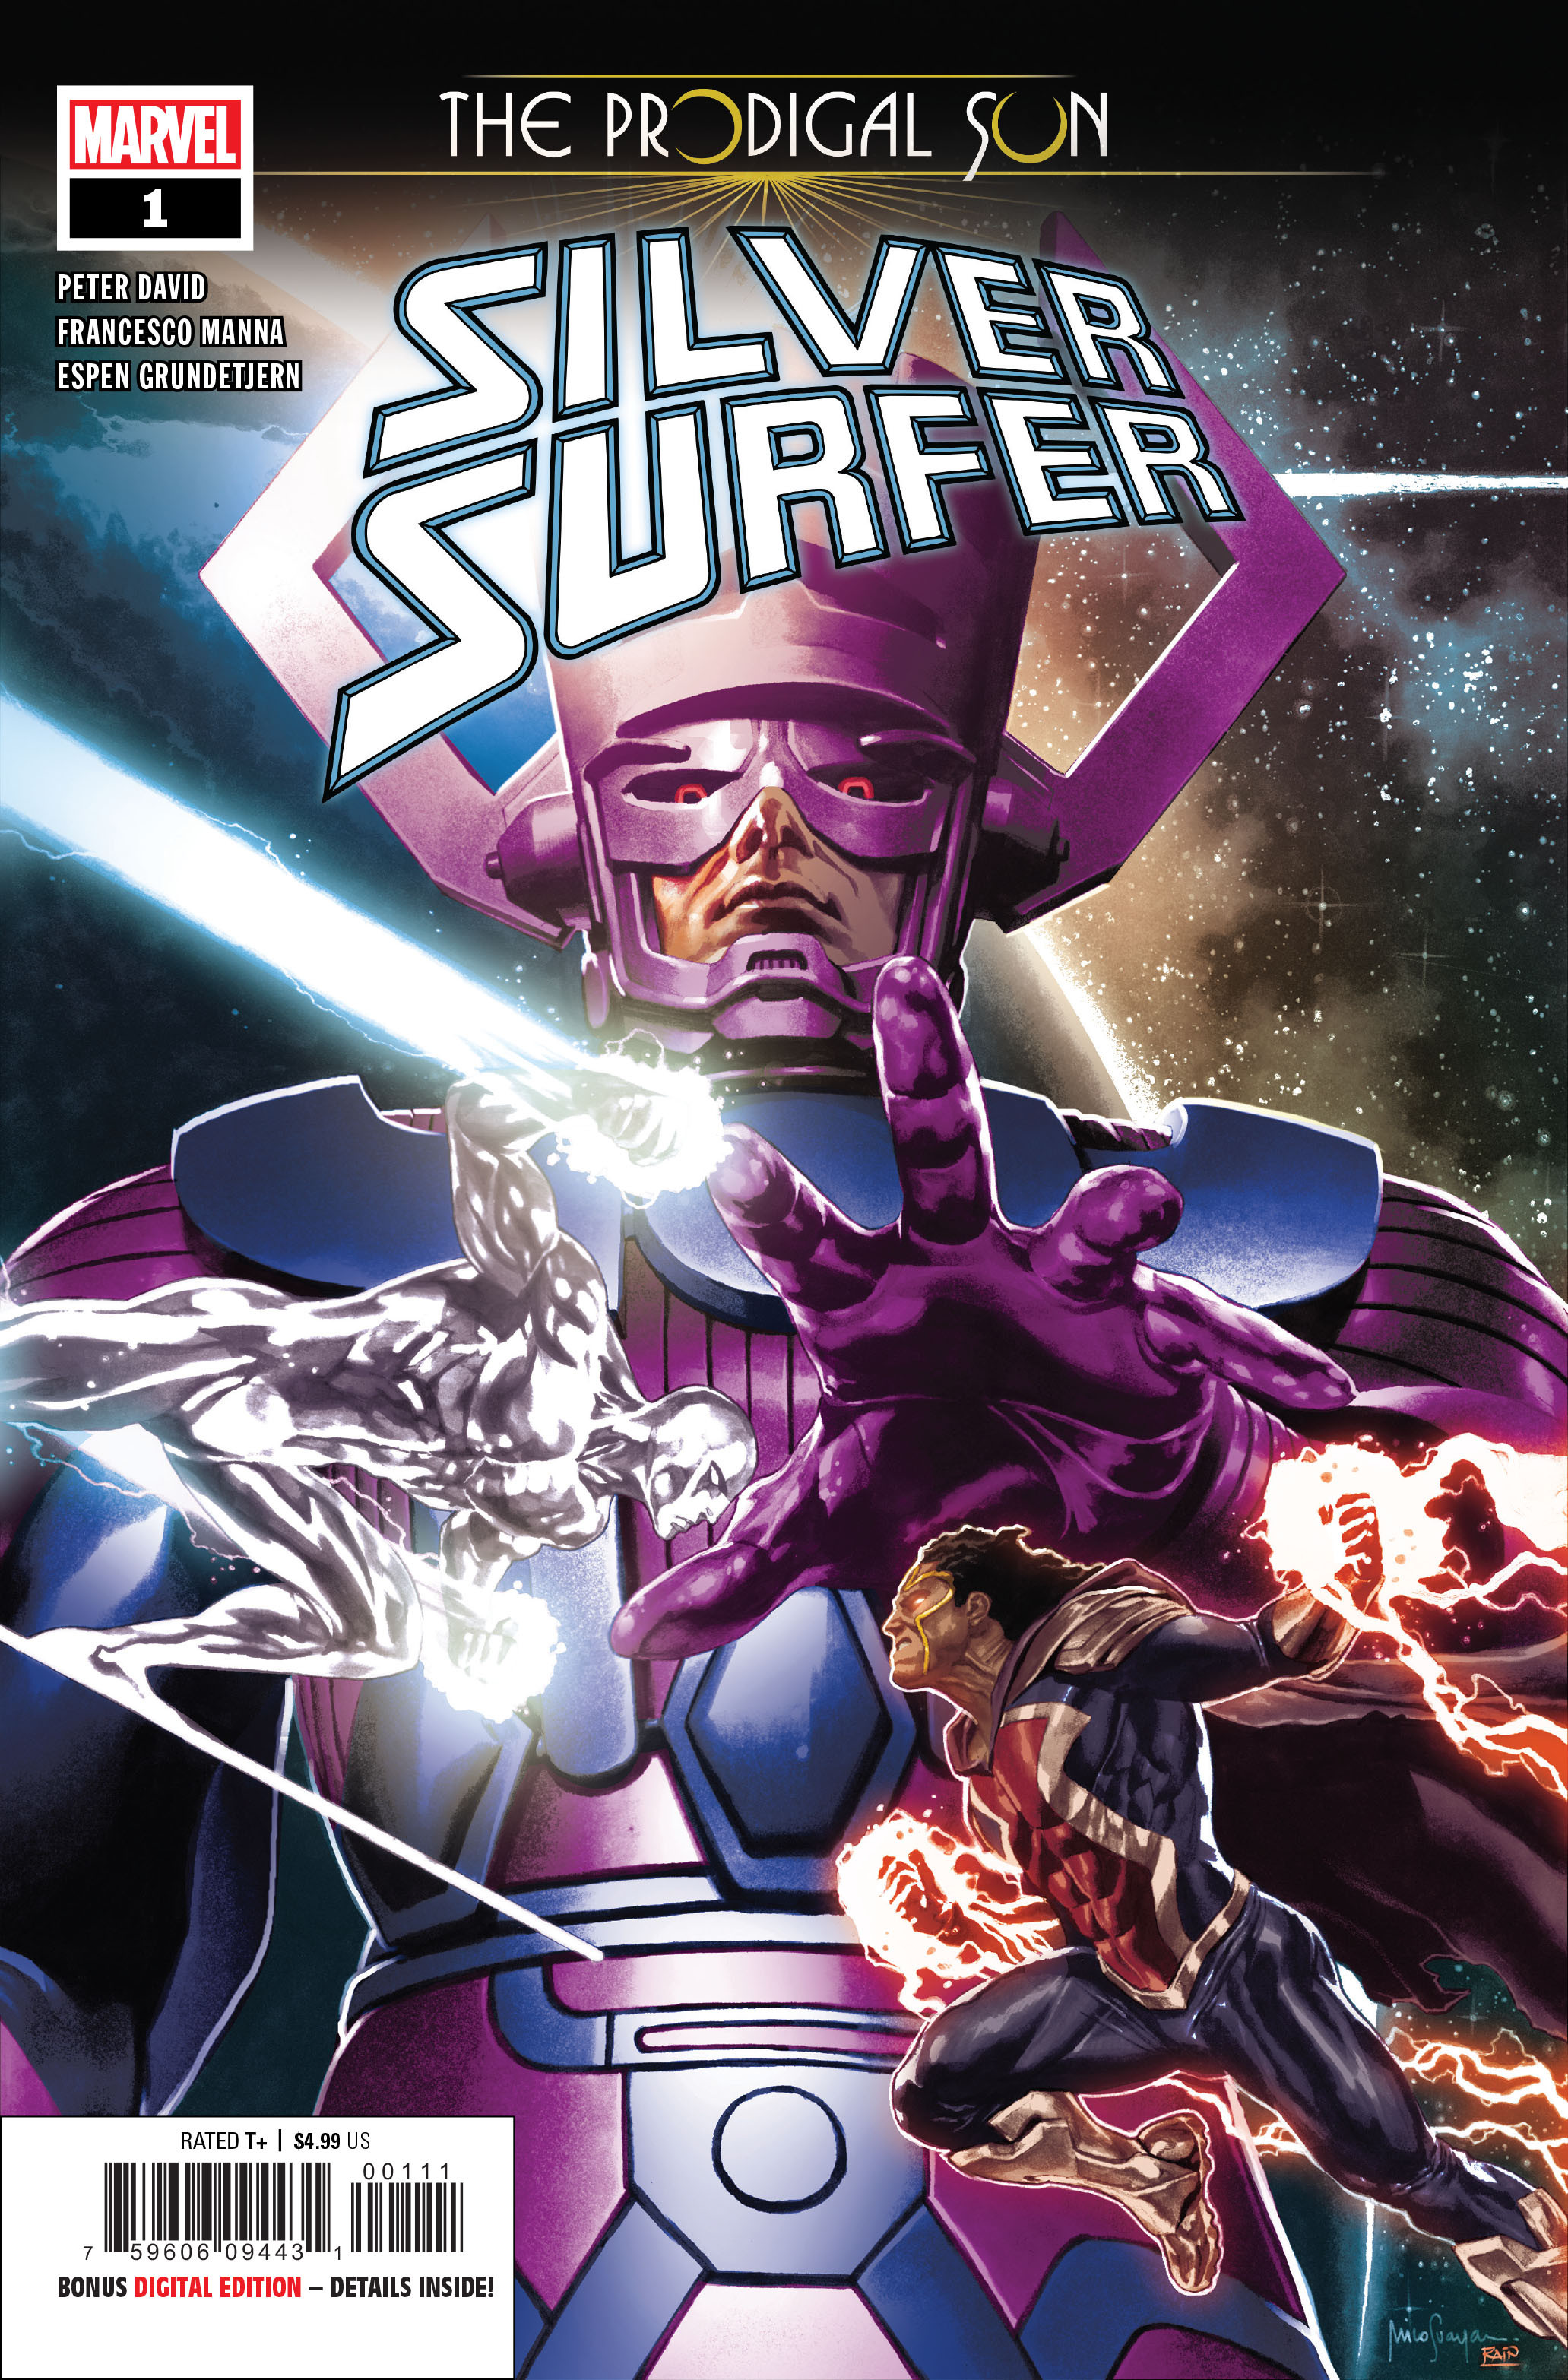 The Prodigal Sun: Silver Surfer #1 Cover. Published by Marvel Entertainment